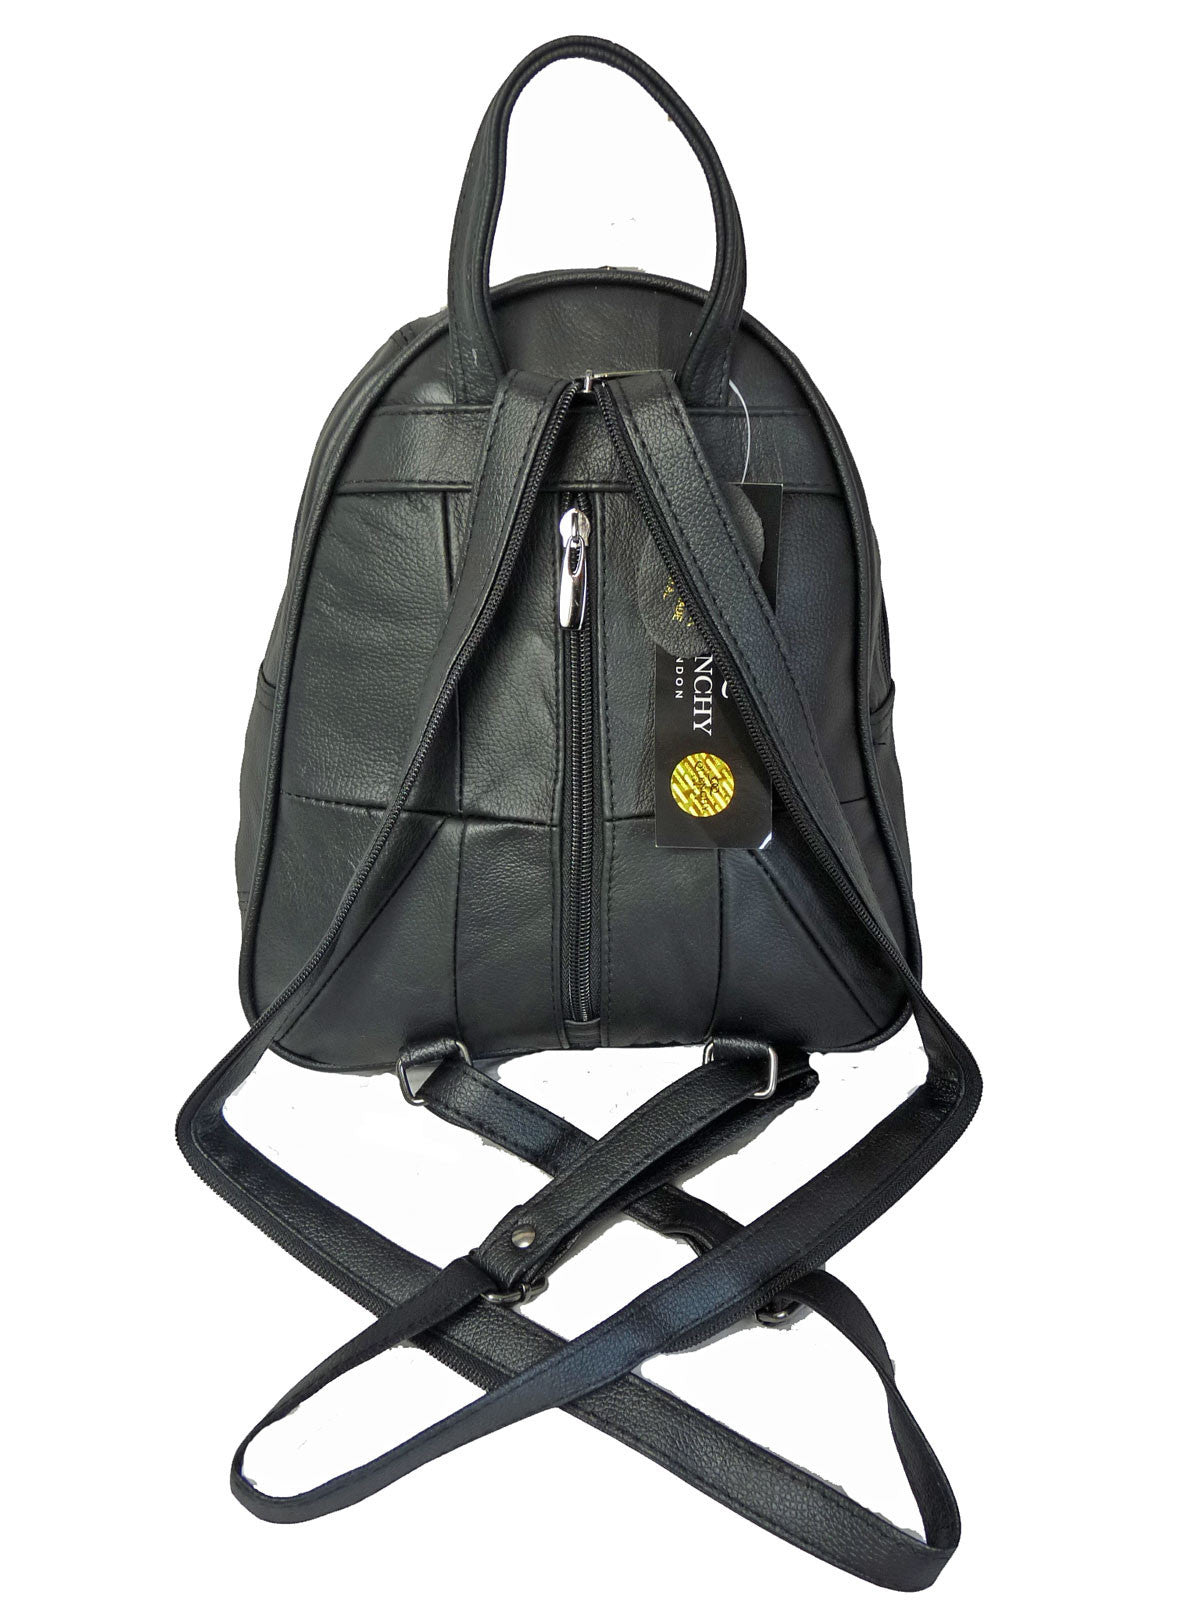 Leather Backpack Rucksack Small Medium Size QL748K - Quenchy London